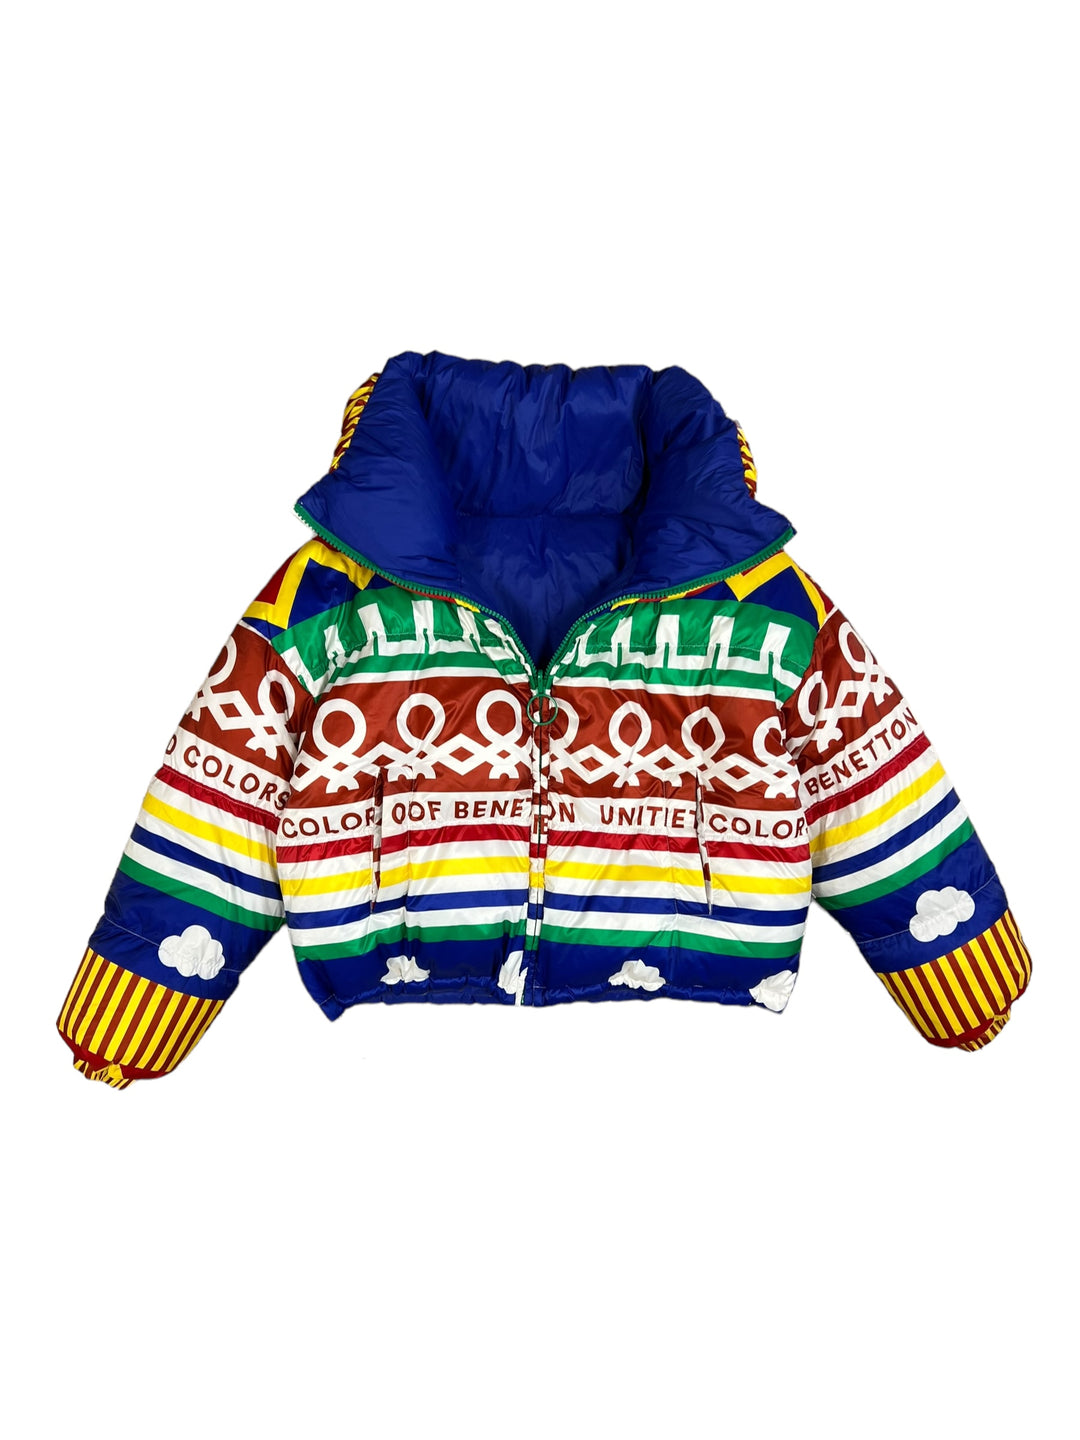 United Colors of Benetton reversible y2k all over print puffer jacket women’s M/L